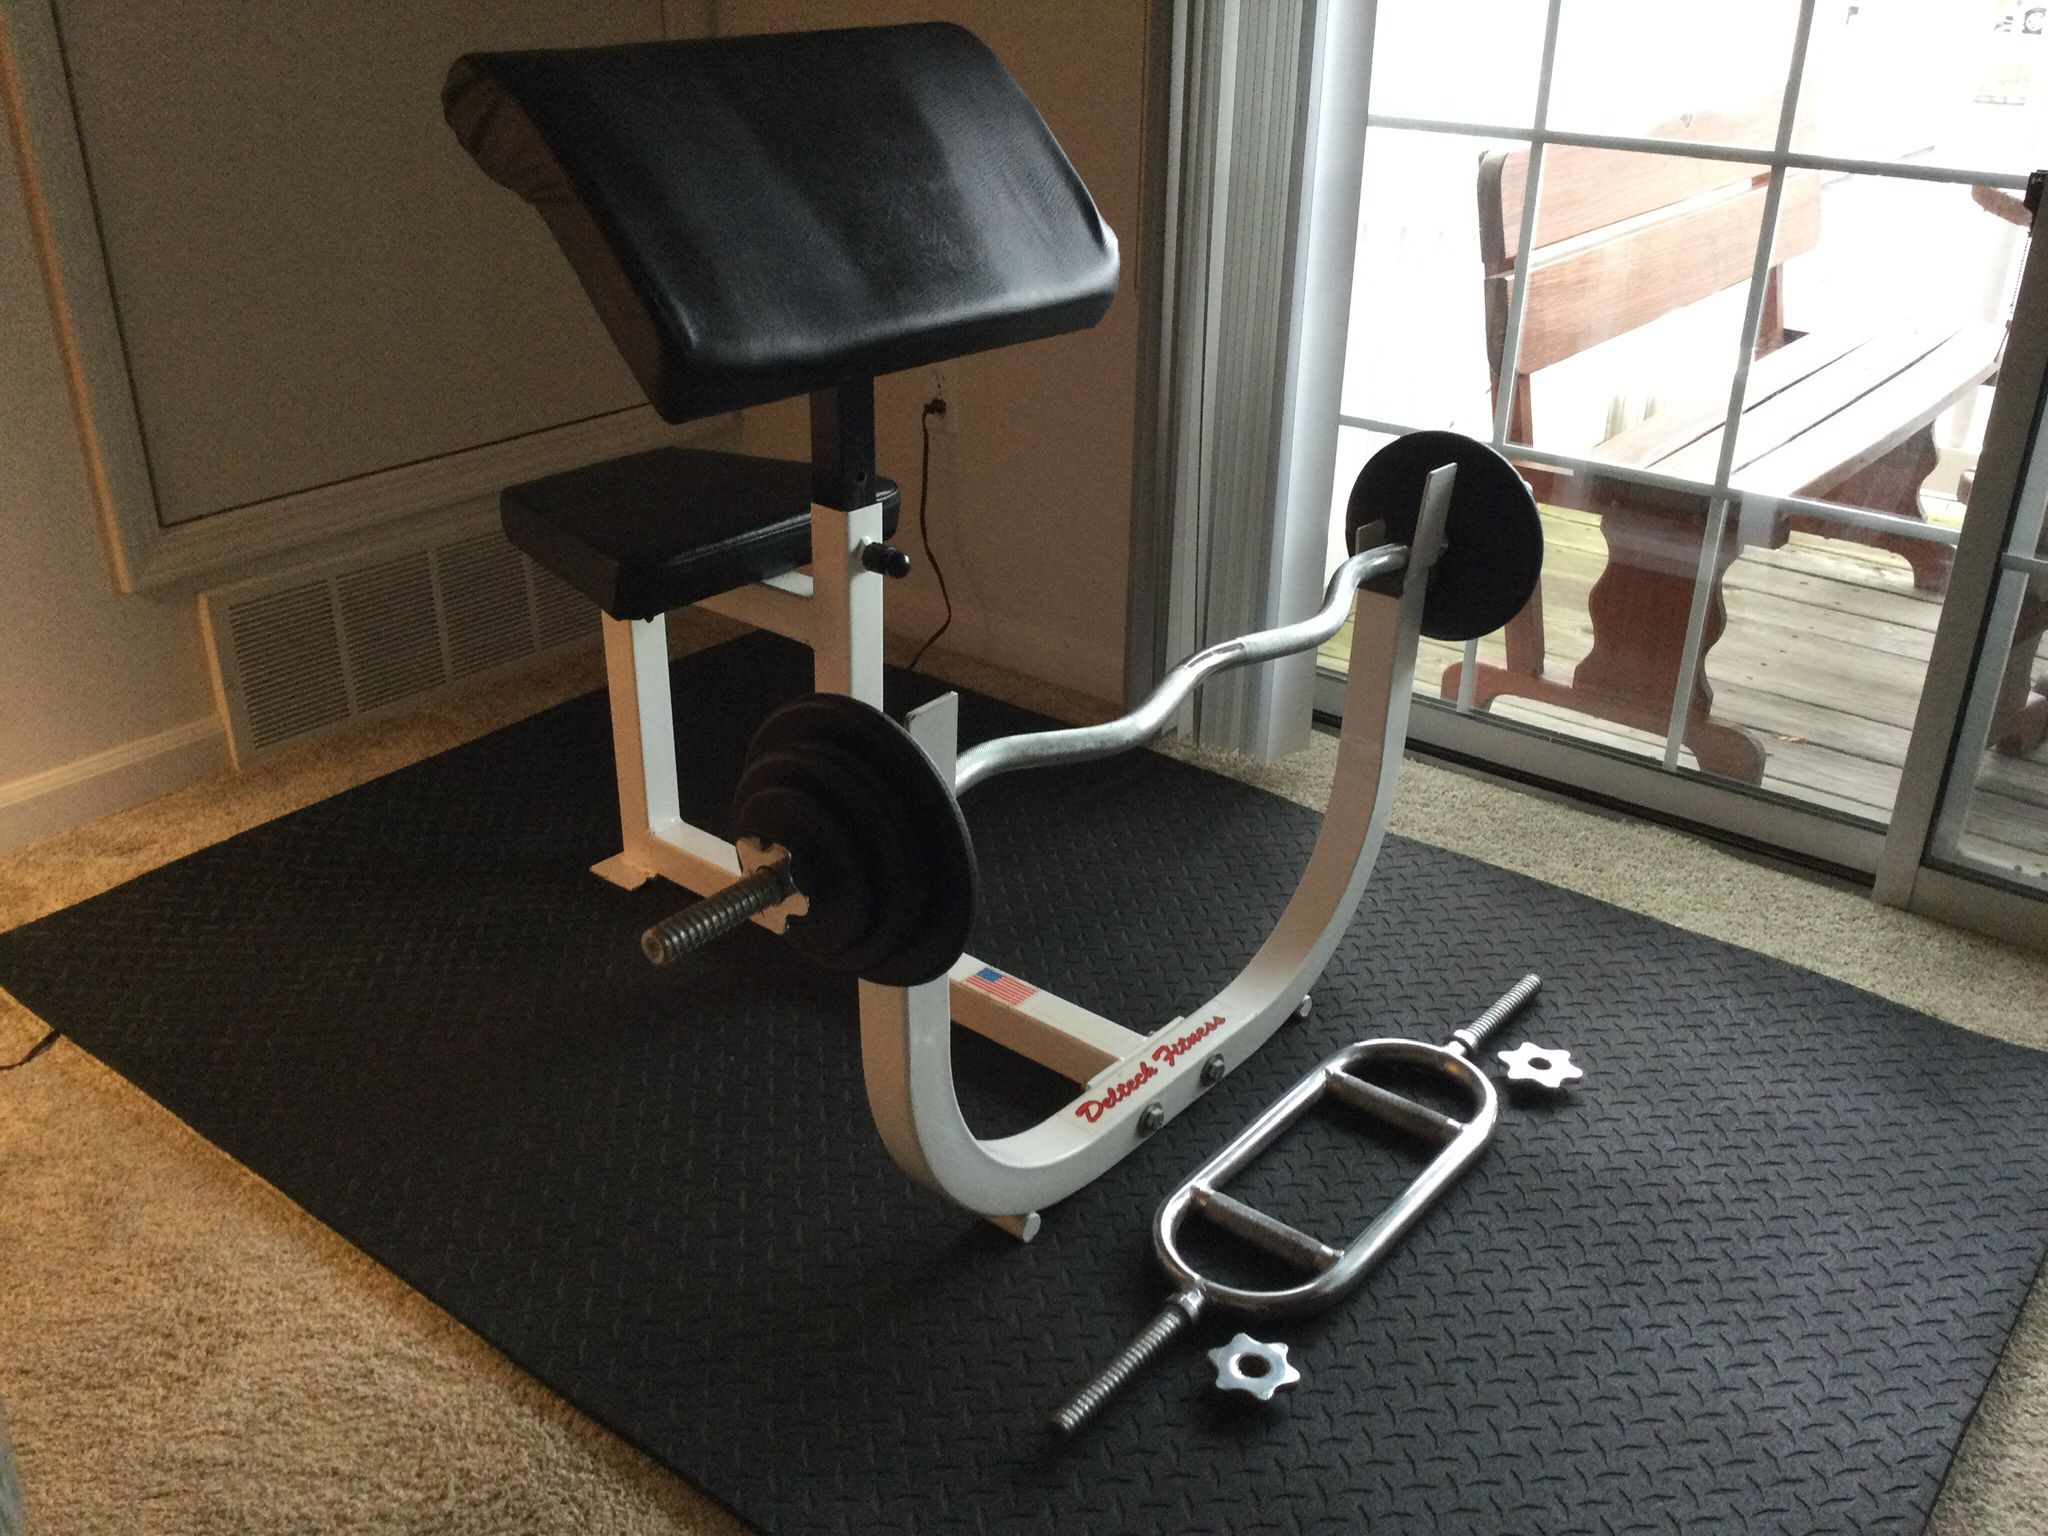 Preacher Curl Weight Bench With 2 Barbells And Standard Weights